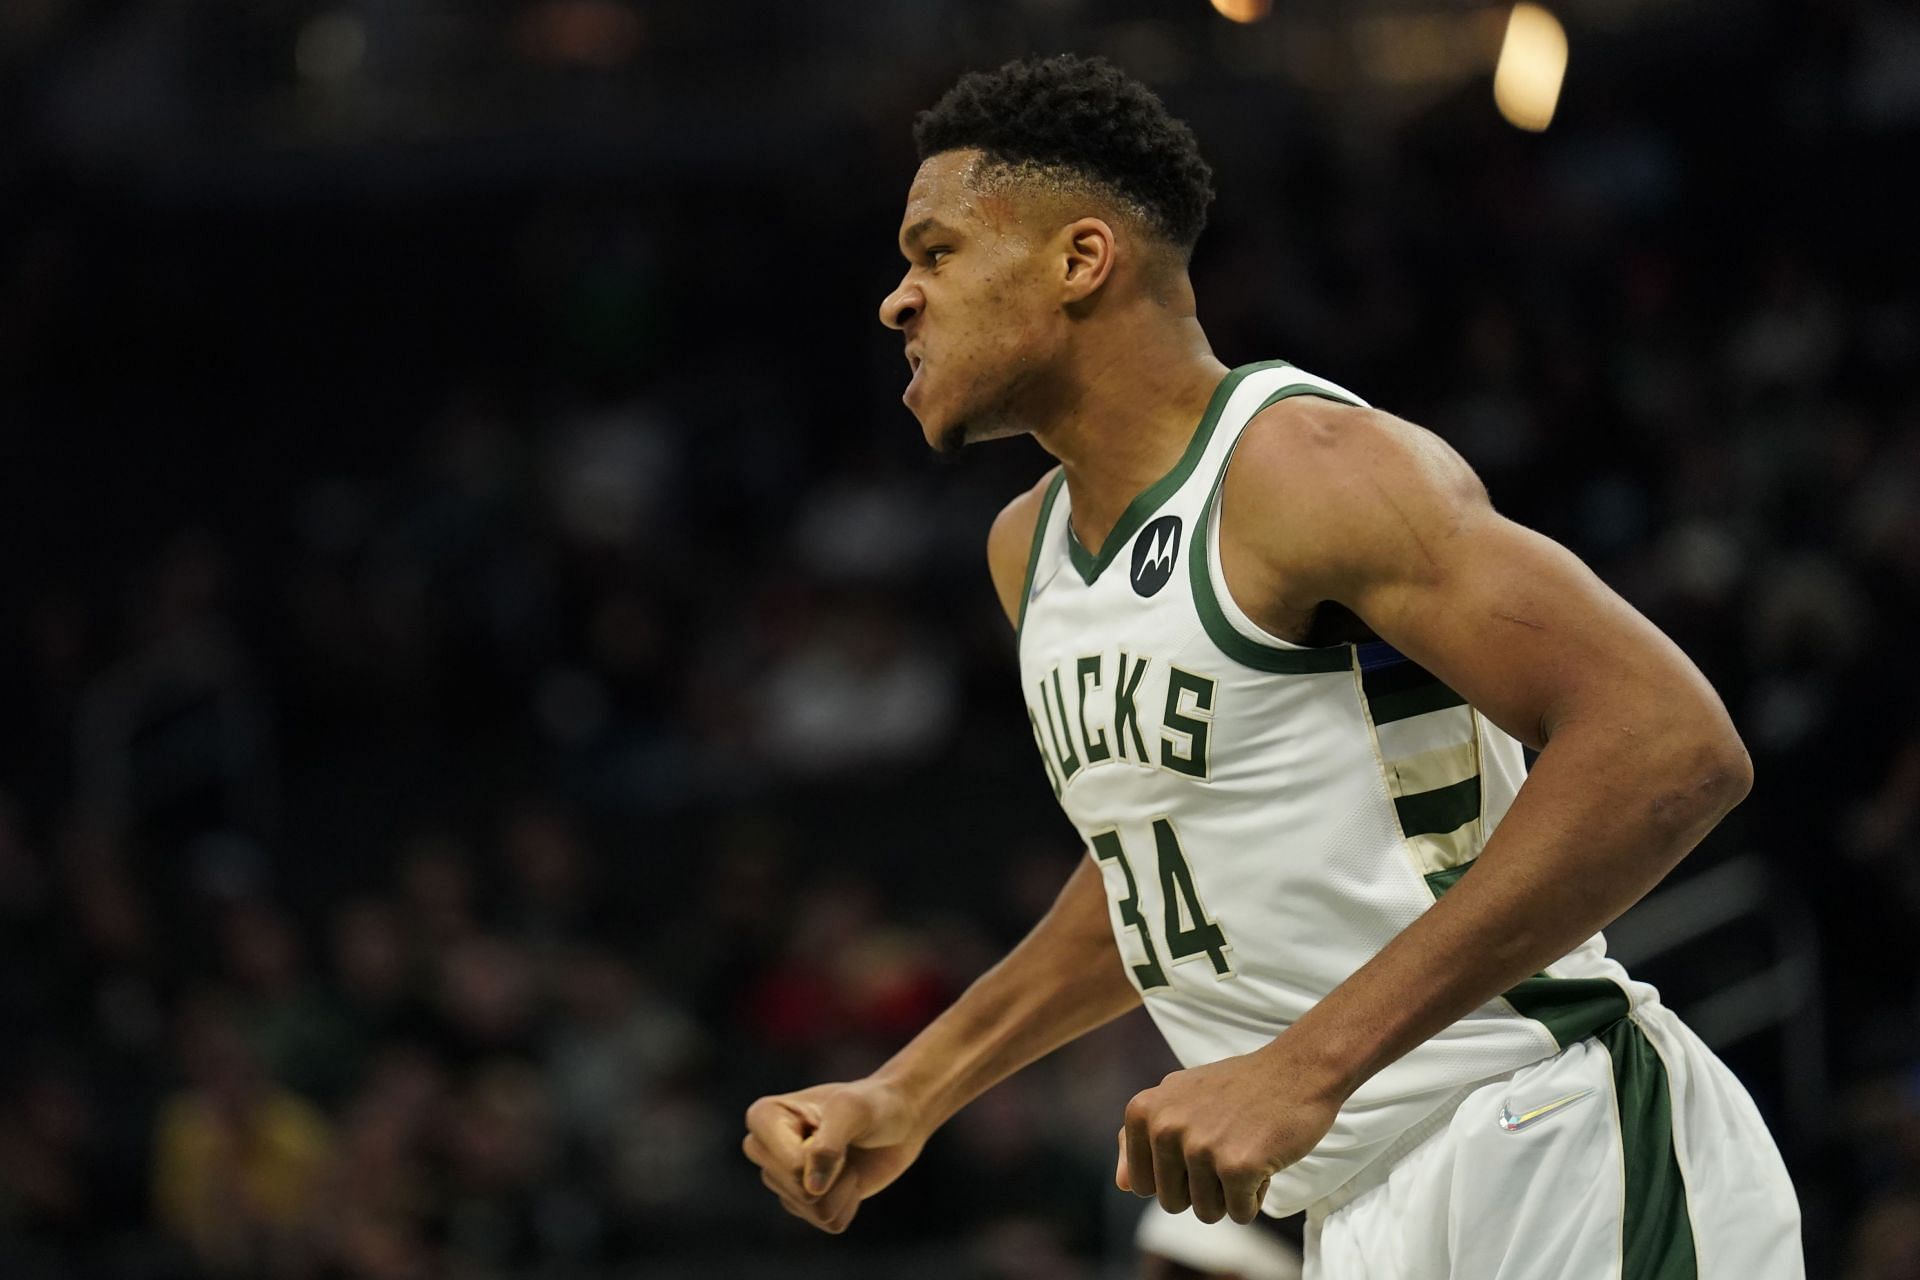 Giannis Antetokounmpo led the Milwaukee Bucks to their first championship title in 50 years